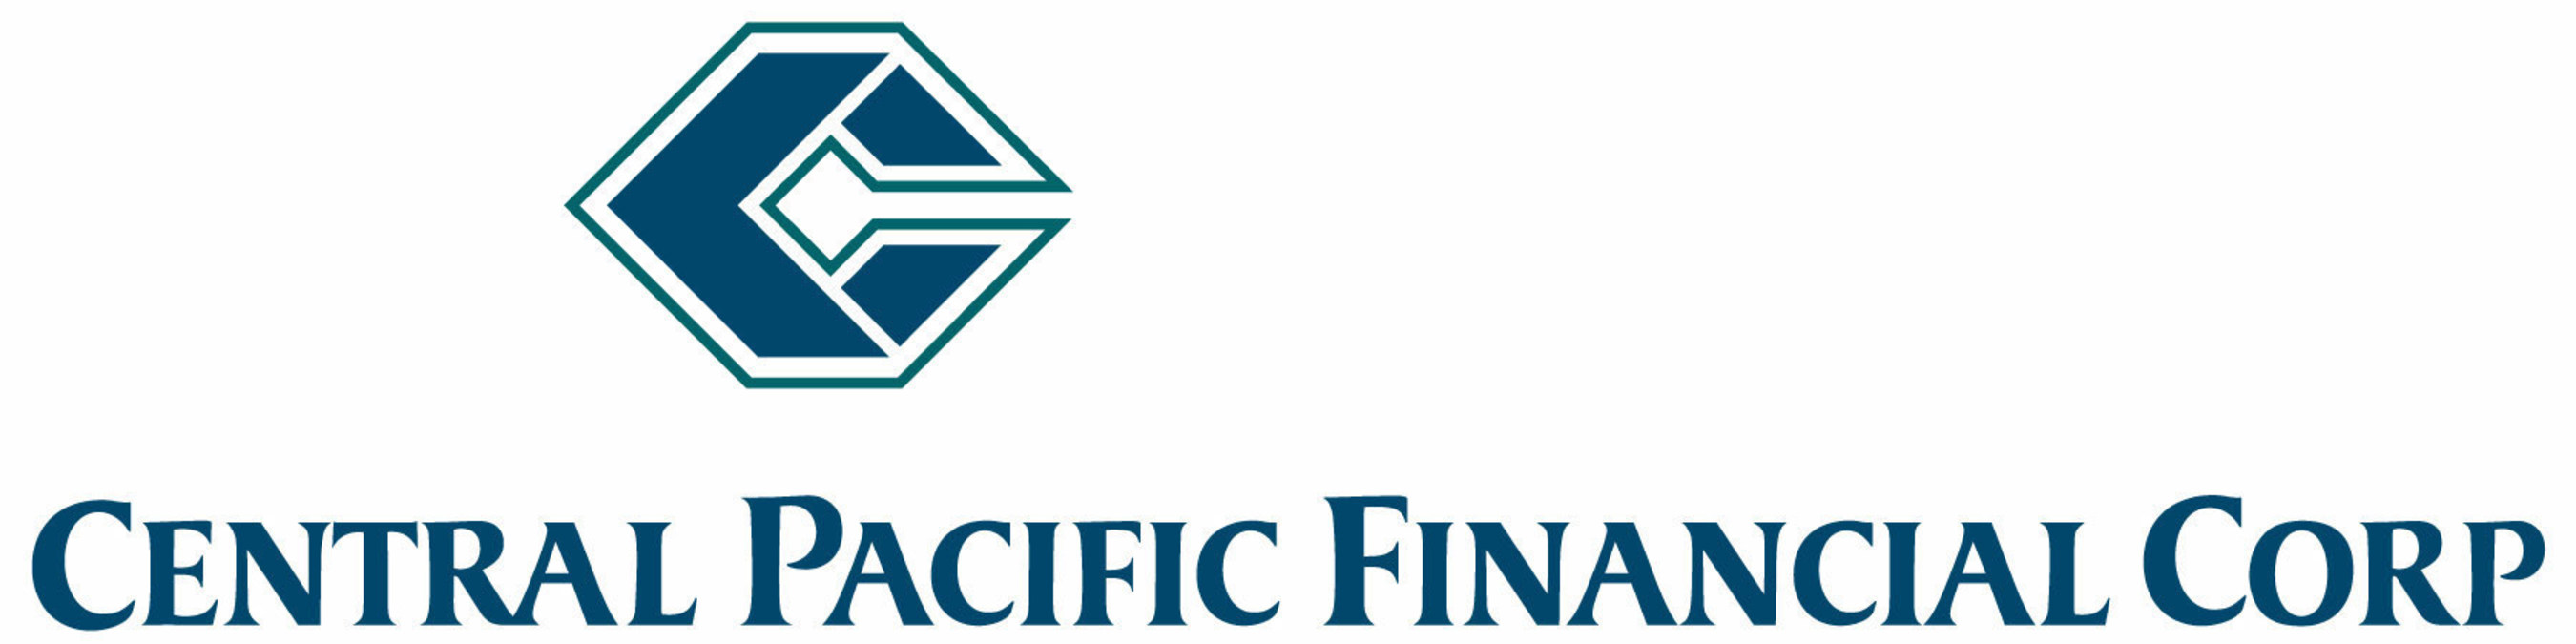 Central Pacific Financial Corp. Logo